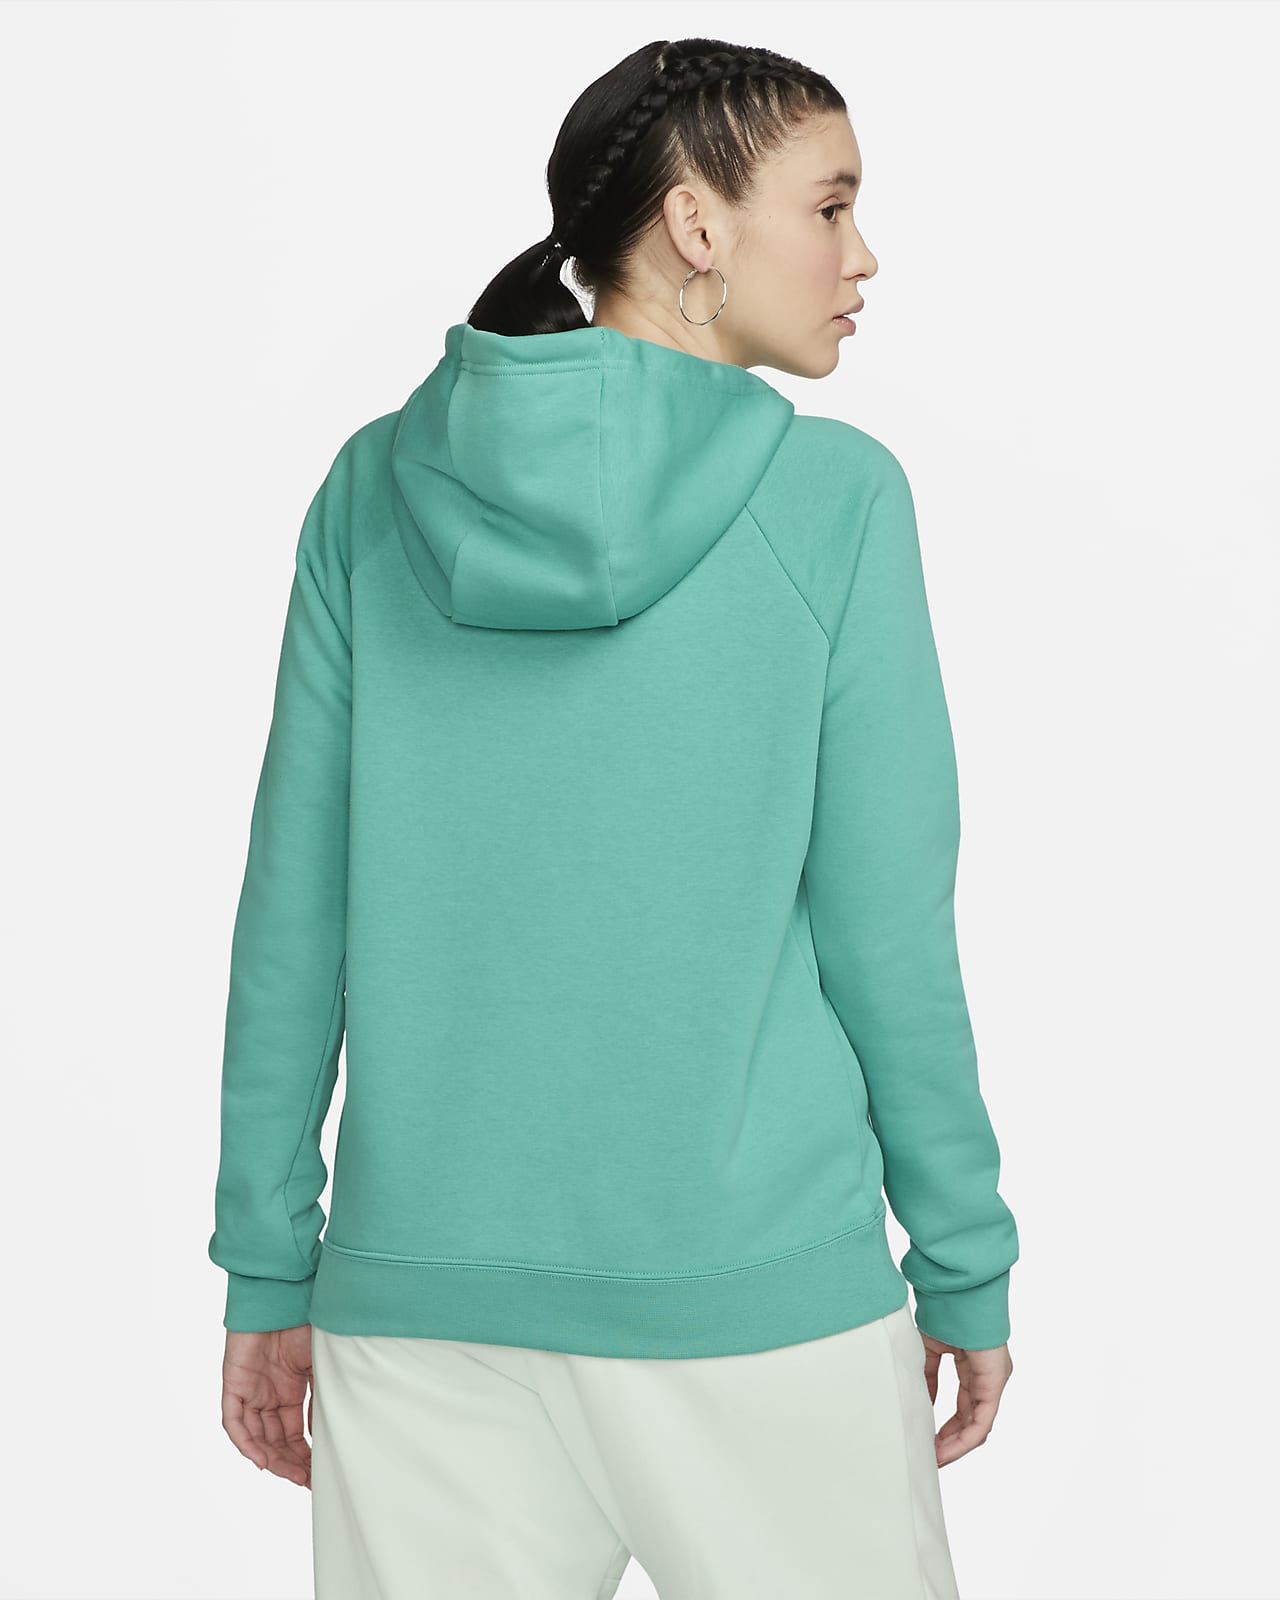 https://static.nike.com/a/images/t_PDP_1280_v1/f_auto,q_auto:eco/b3c6be20-2ed8-4571-bc3d-db2c0b3bb14f/sportswear-essential-womens-fleece-pullover-hoodie-RCKdm0.png